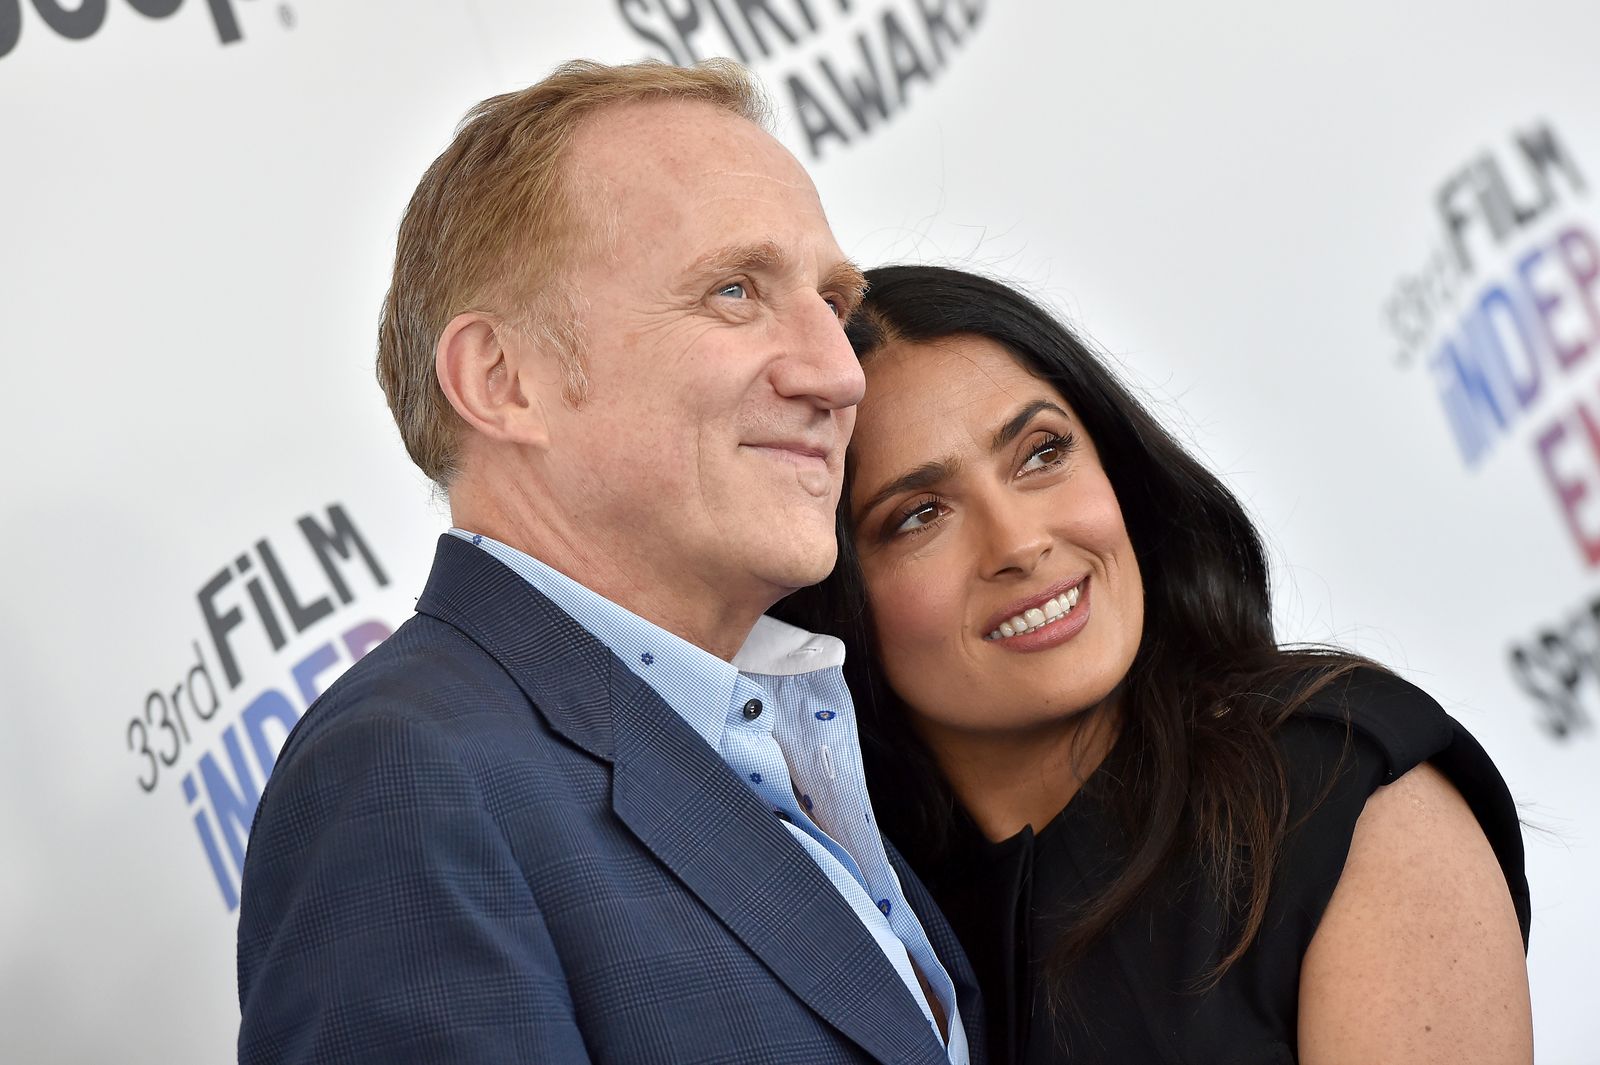 Francois-Henri Pinault and Salma Hayek at the Film Independent Spirit Awards on March 3, 2018, in Santa Monica, California | Photo: Axelle/Bauer-Griffin/FilmMagic/Getty Images